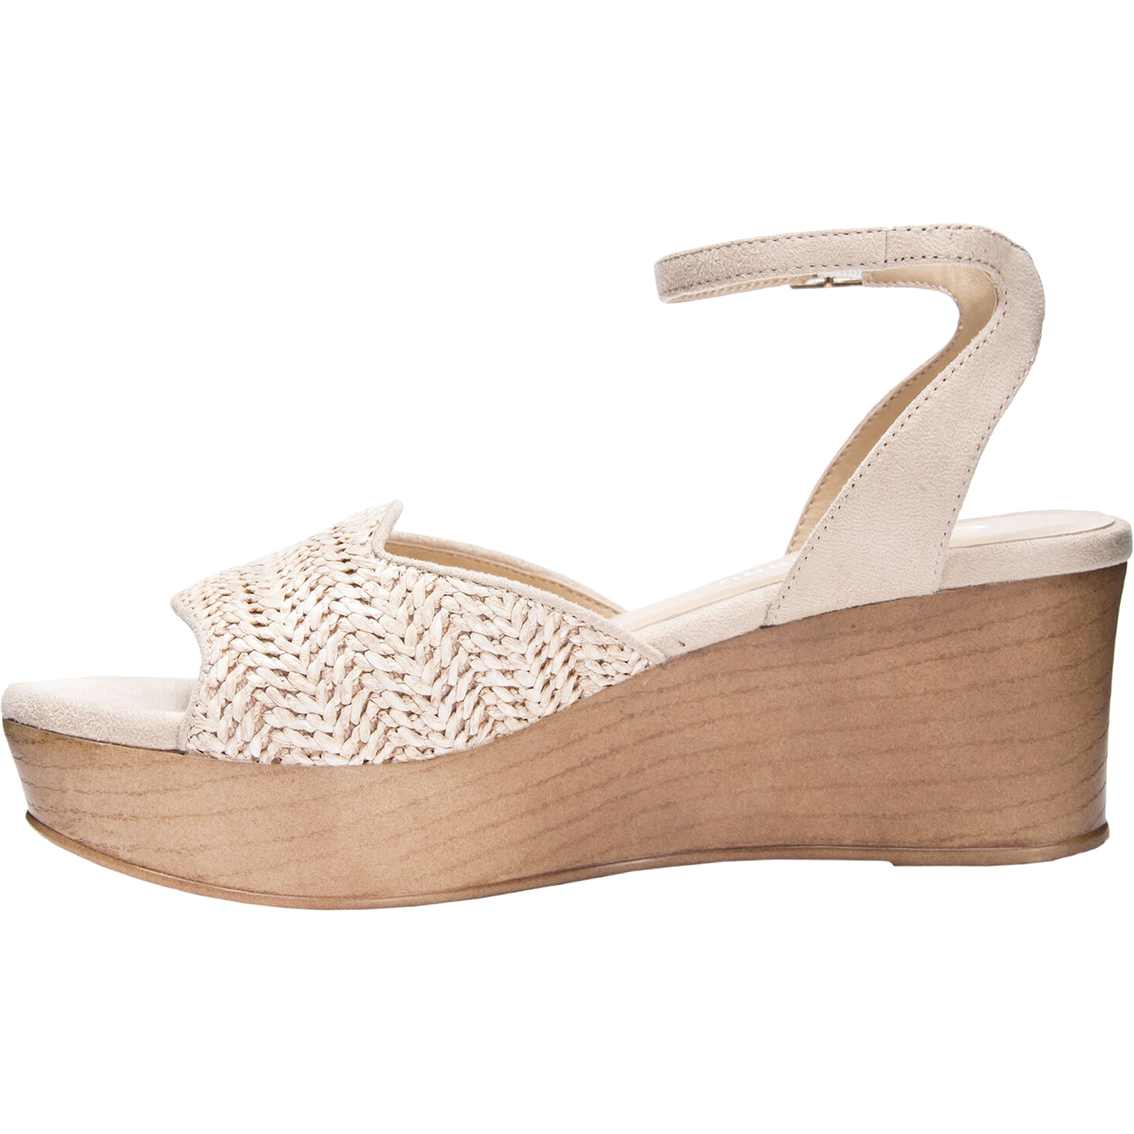 CL By Laundry Charlise Wedge Sandals - Image 3 of 5